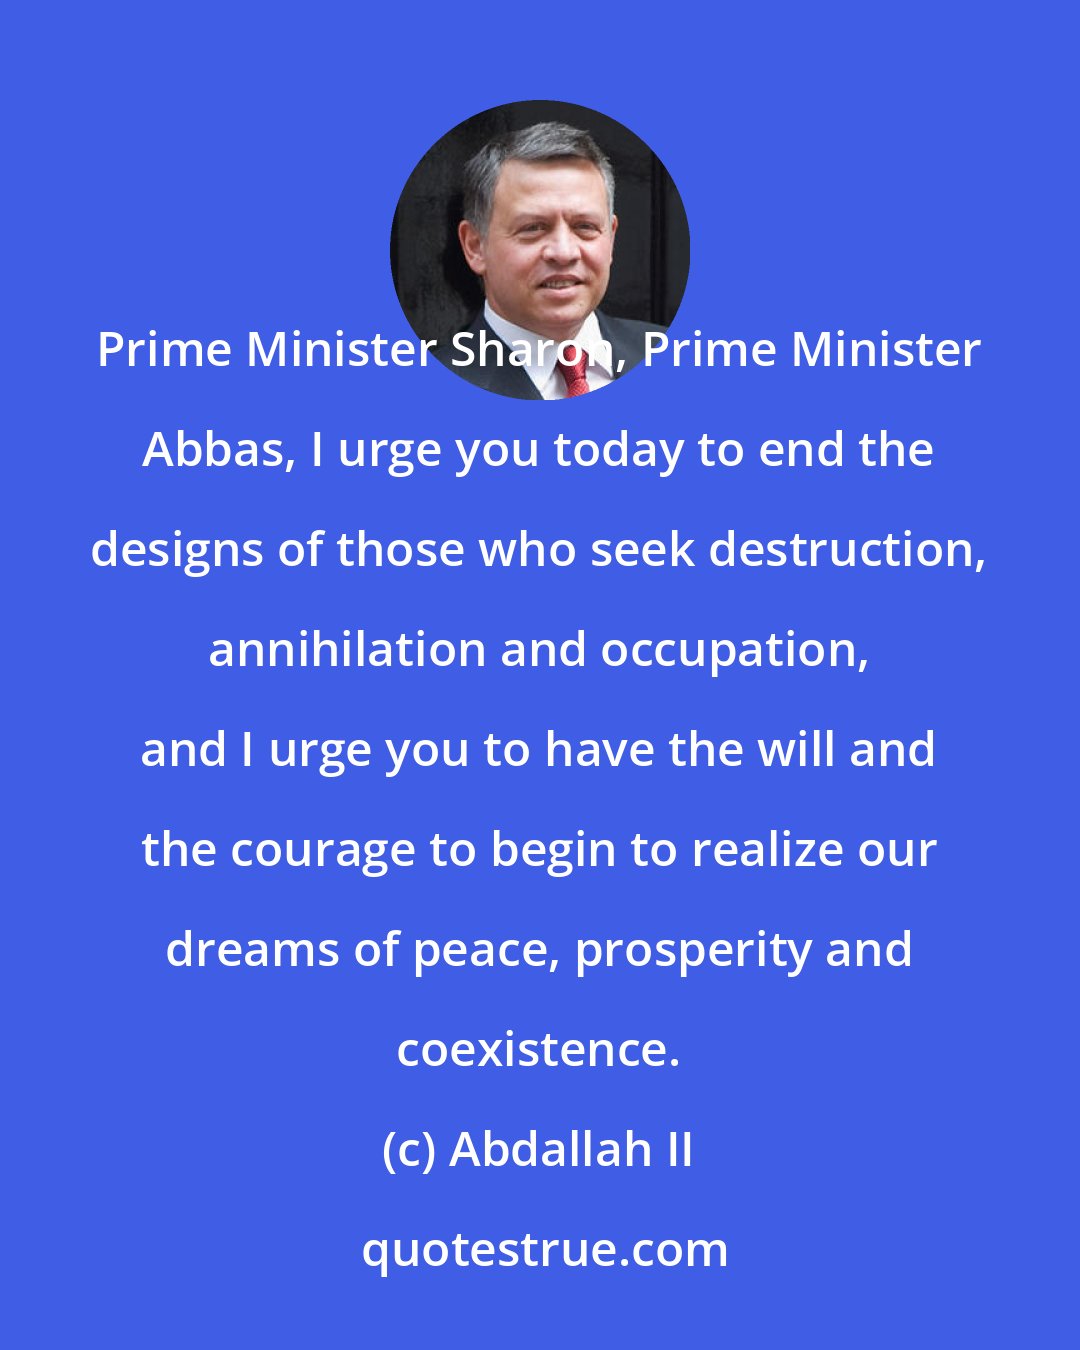 Abdallah II: Prime Minister Sharon, Prime Minister Abbas, I urge you today to end the designs of those who seek destruction, annihilation and occupation, and I urge you to have the will and the courage to begin to realize our dreams of peace, prosperity and coexistence.